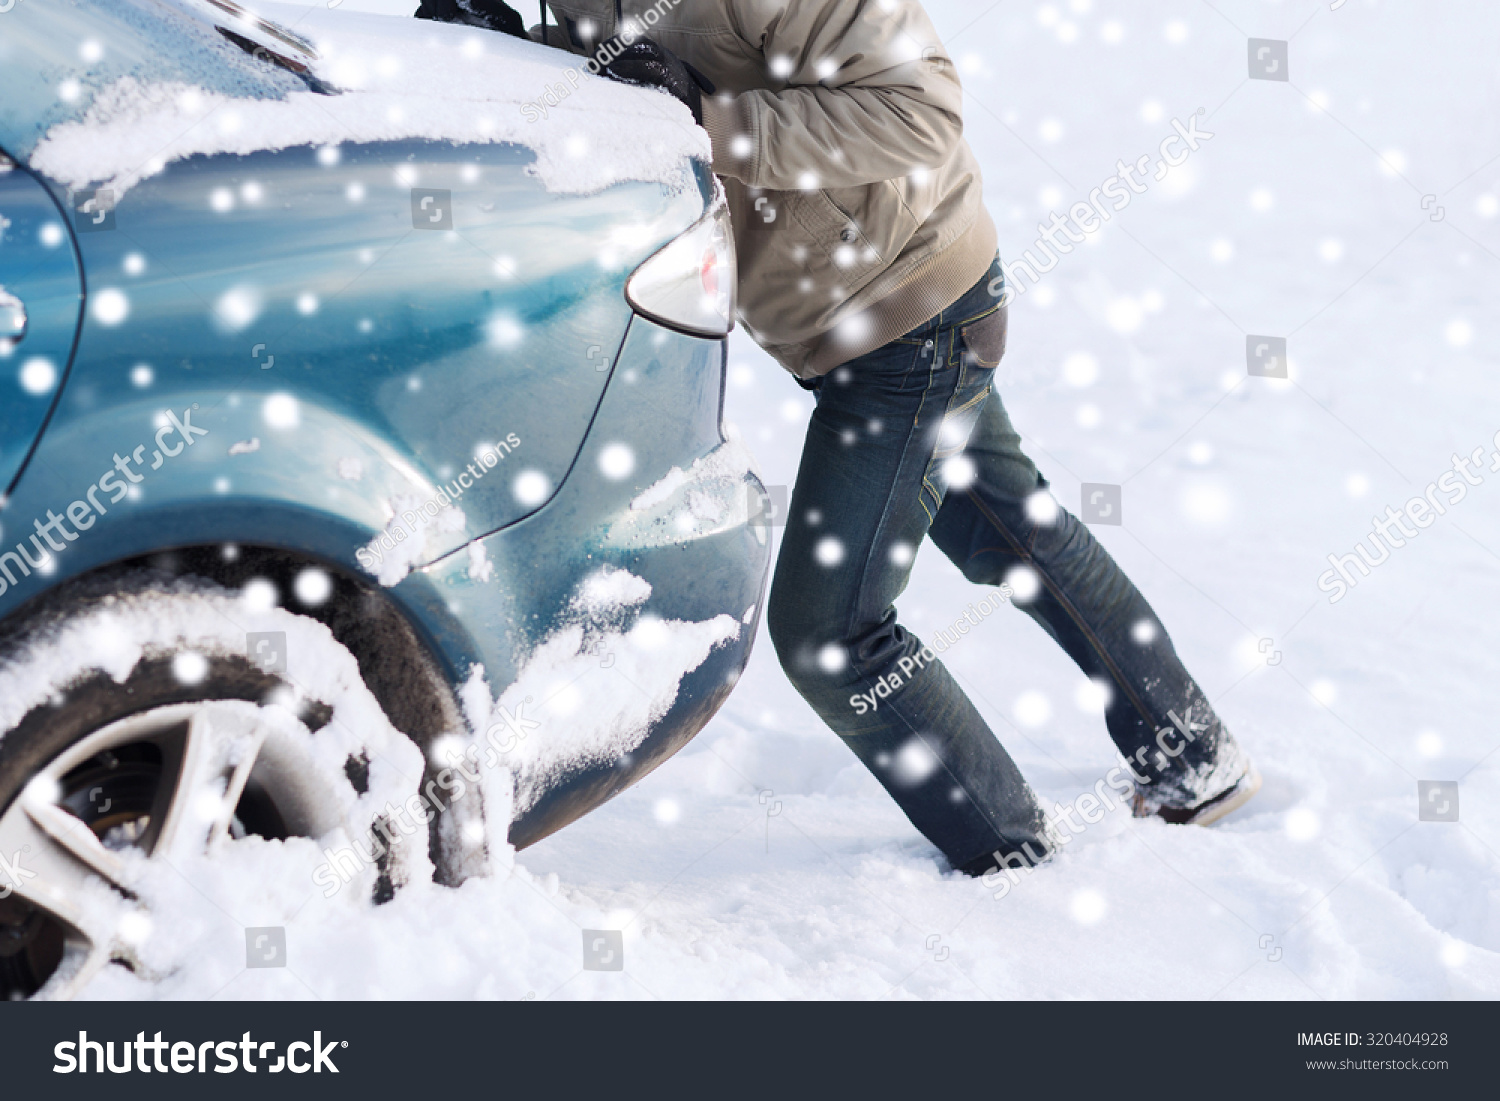 clipart car stuck in snow - photo #23